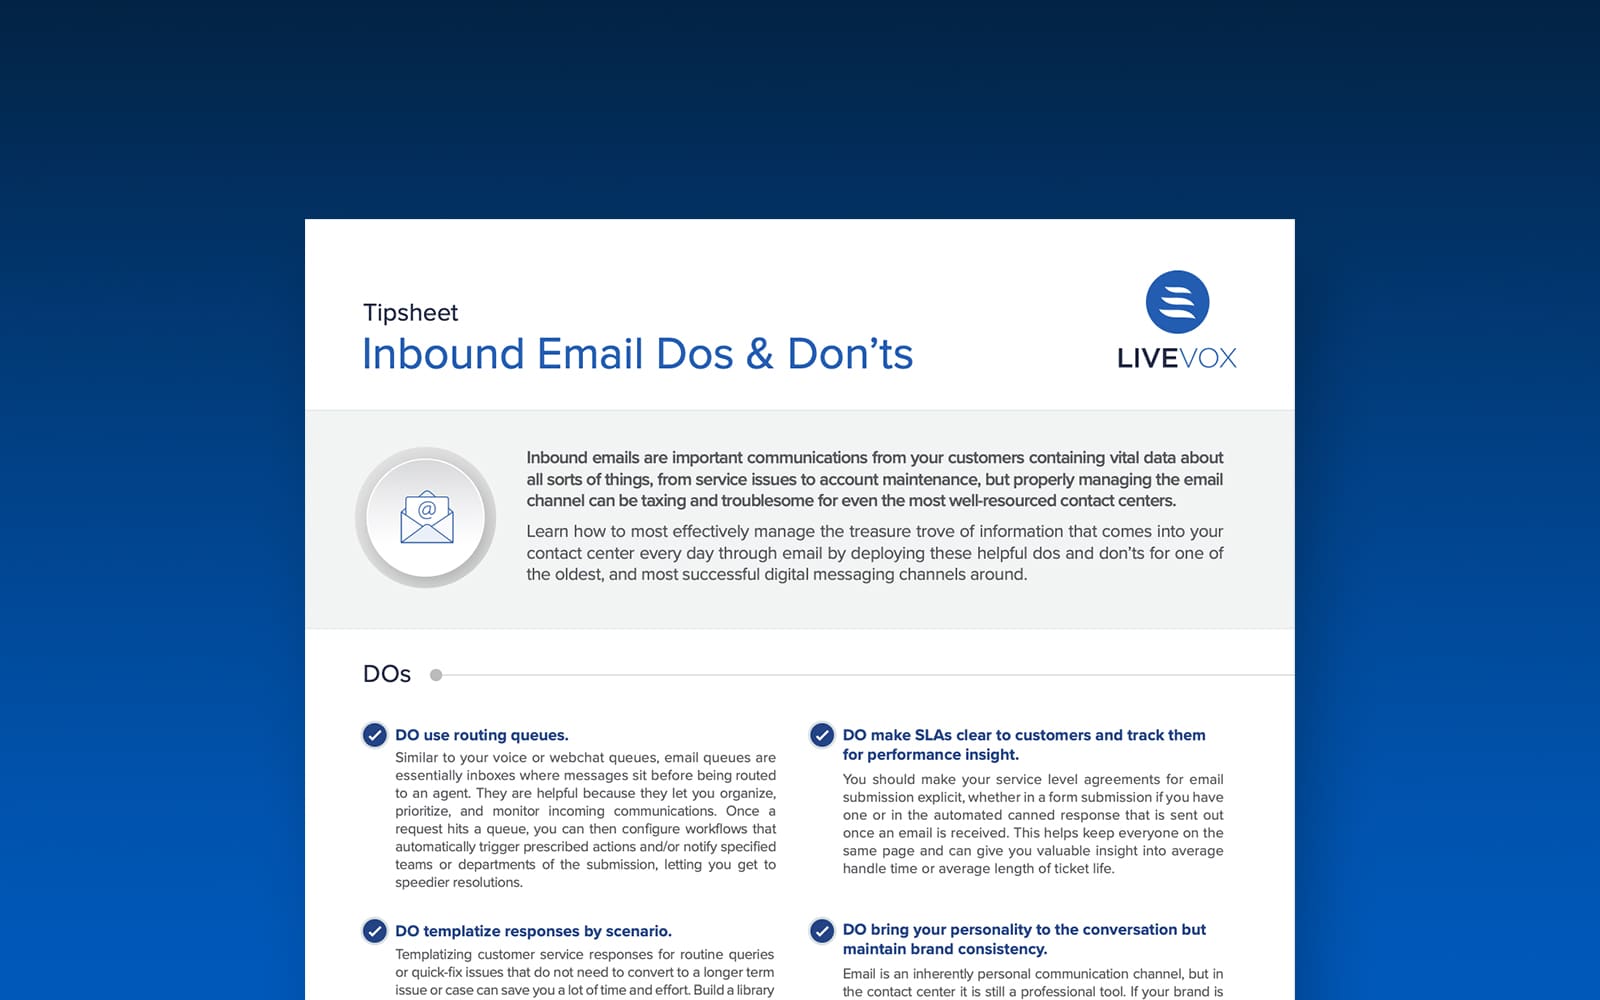 Tip Sheet: Email Do's and Don'ts